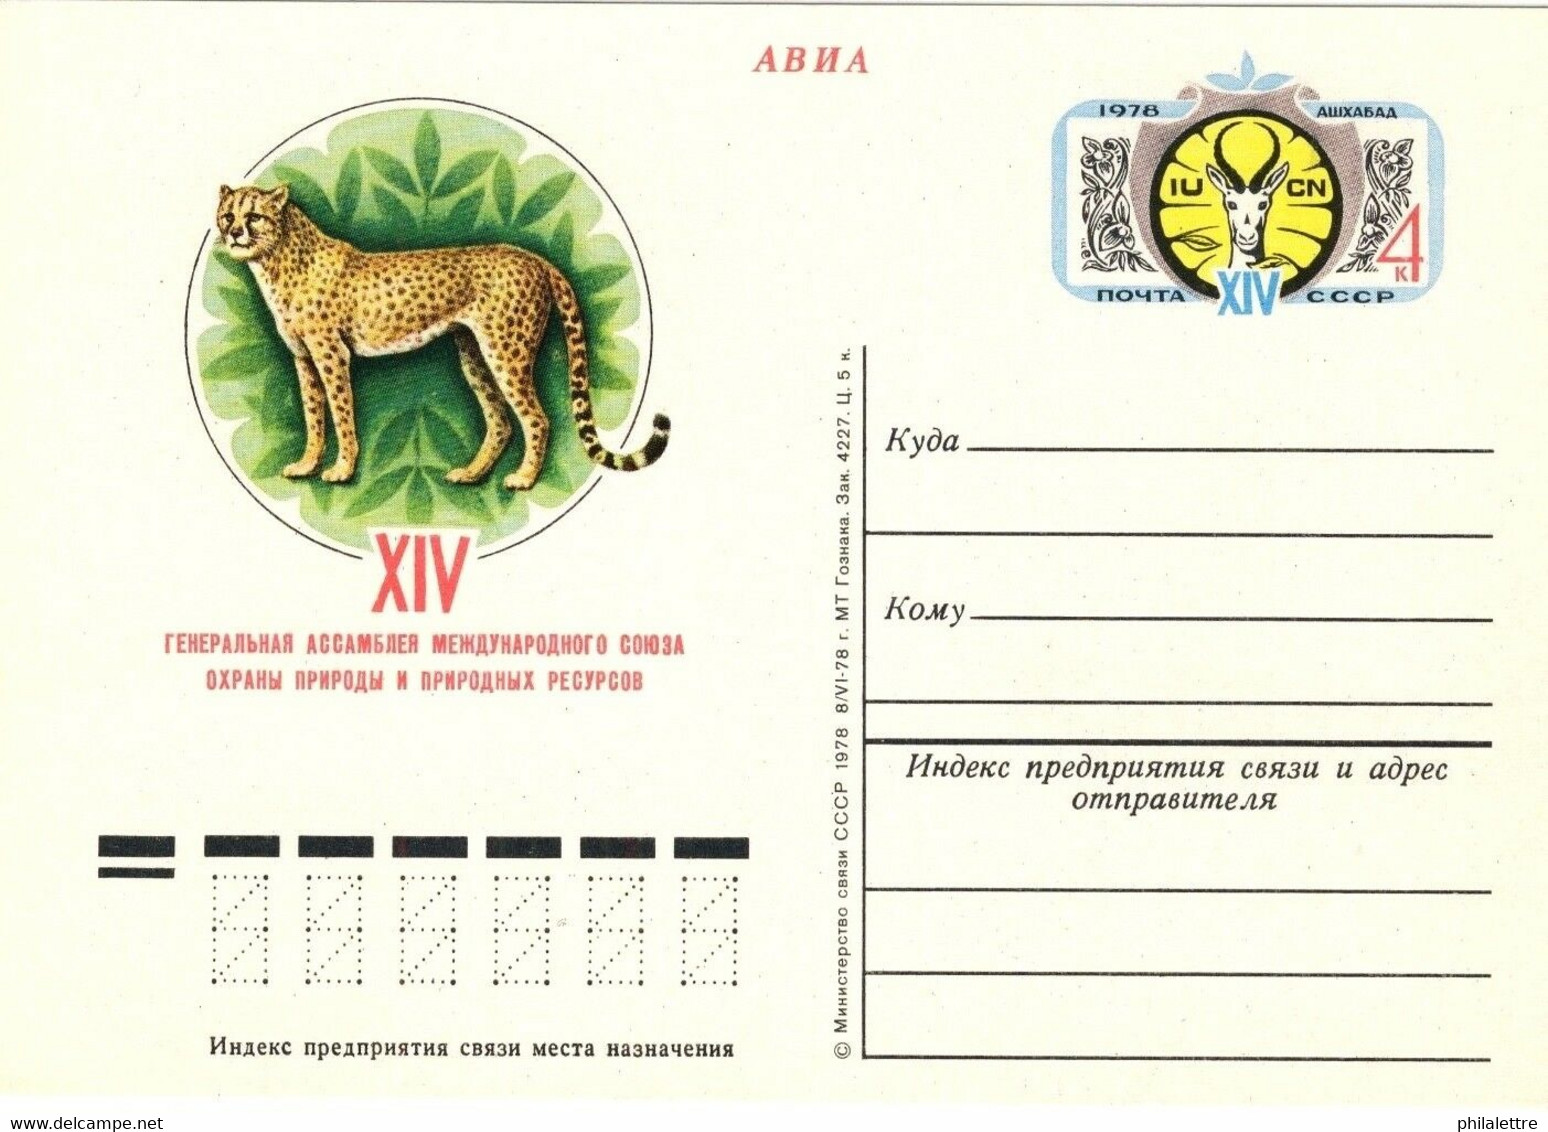 URSS Soviet Union - 1978 4kp CARD UNION FOR THE CONSERVATION OF NATURE Mi.PS066 - 1970-79